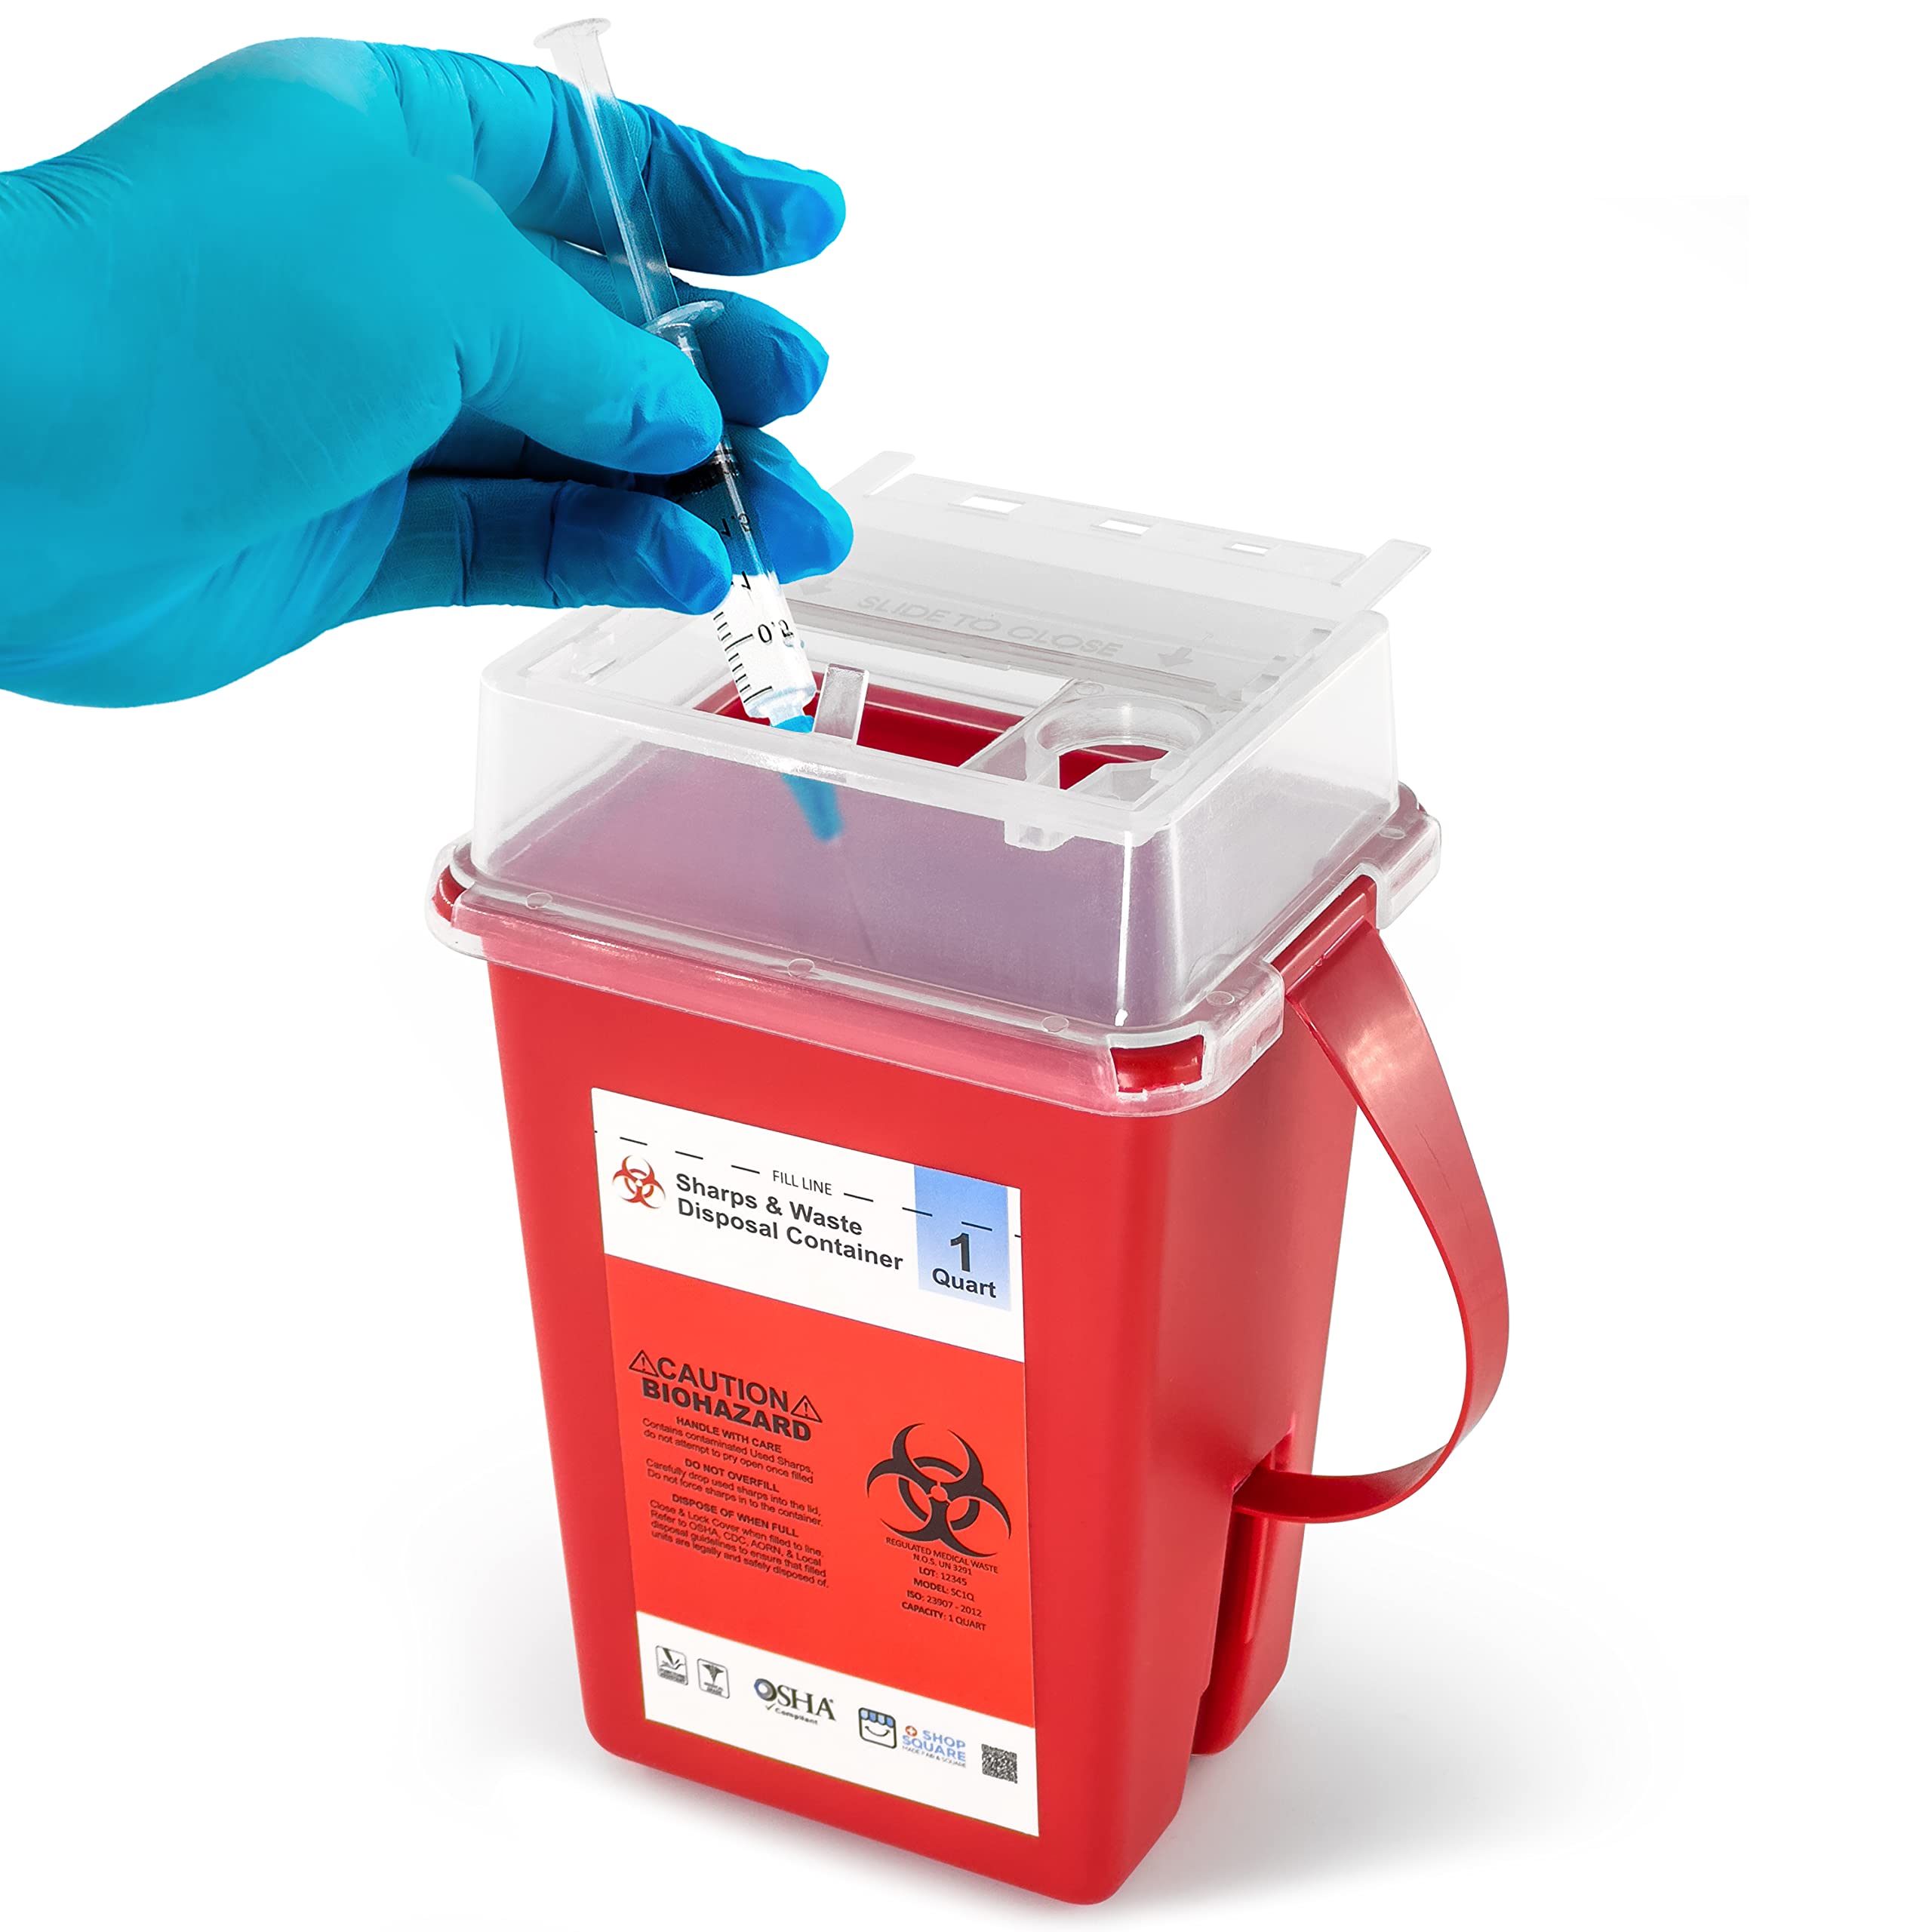 Shop Square Sharps Container, Sharps Containers for Home Use, Needle Disposal Containers, Sharps Disposal Container, Biohazard Containers, S